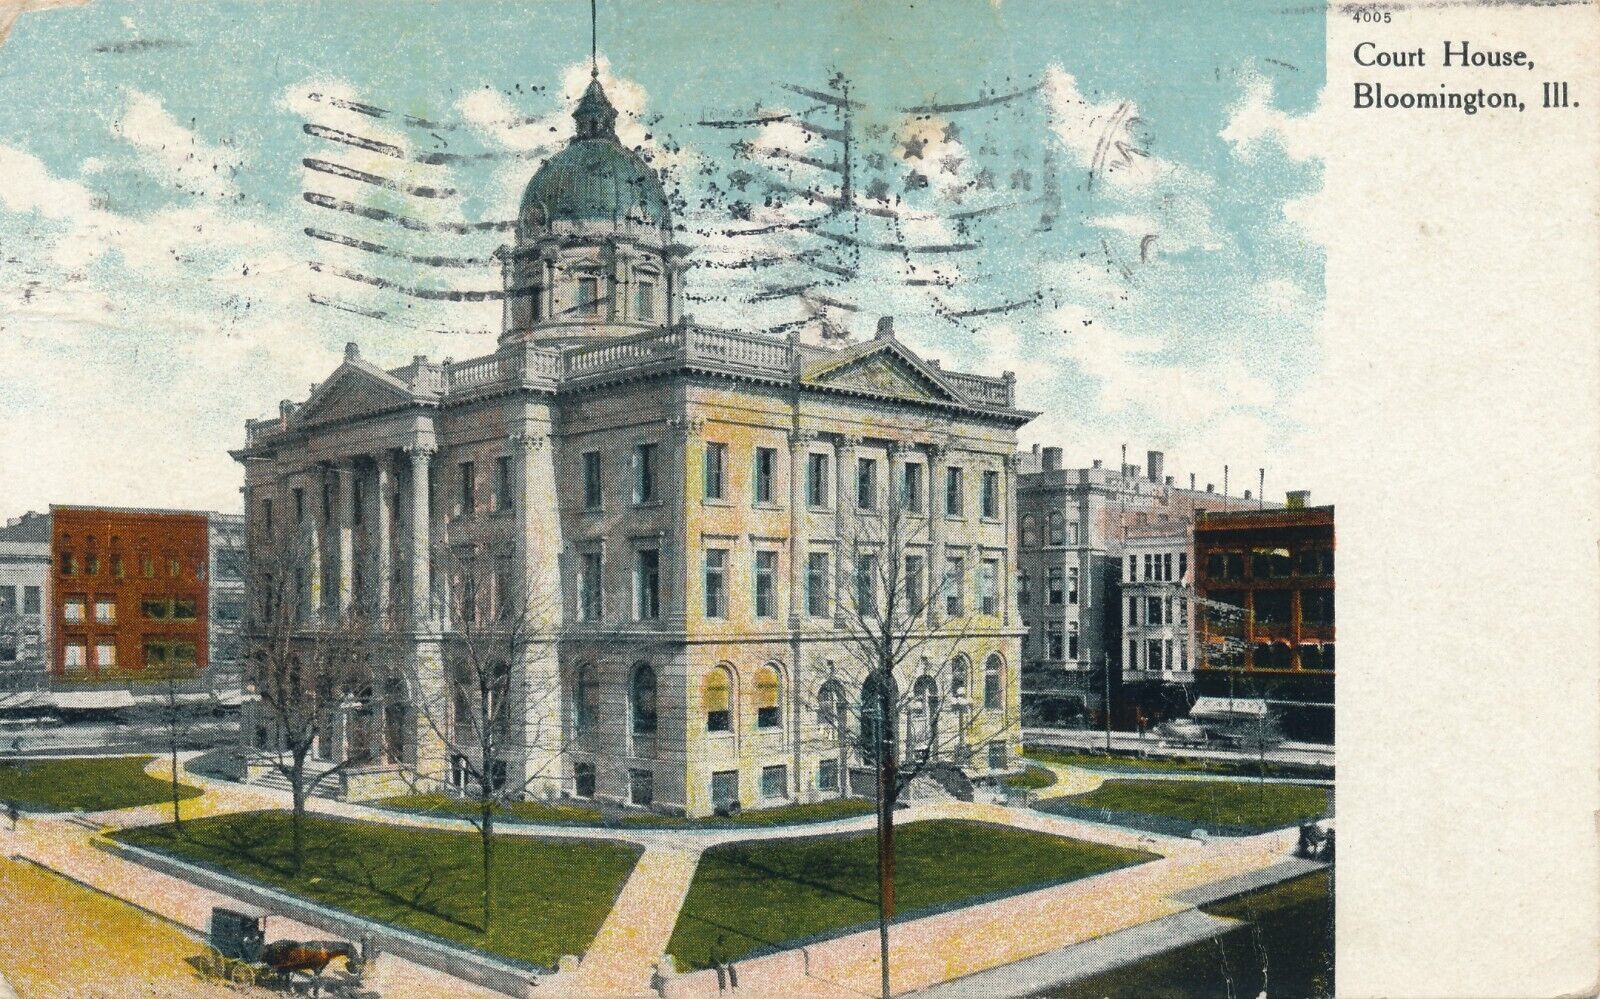 Court House in Bloomington, IL 1910 posted antique postcard